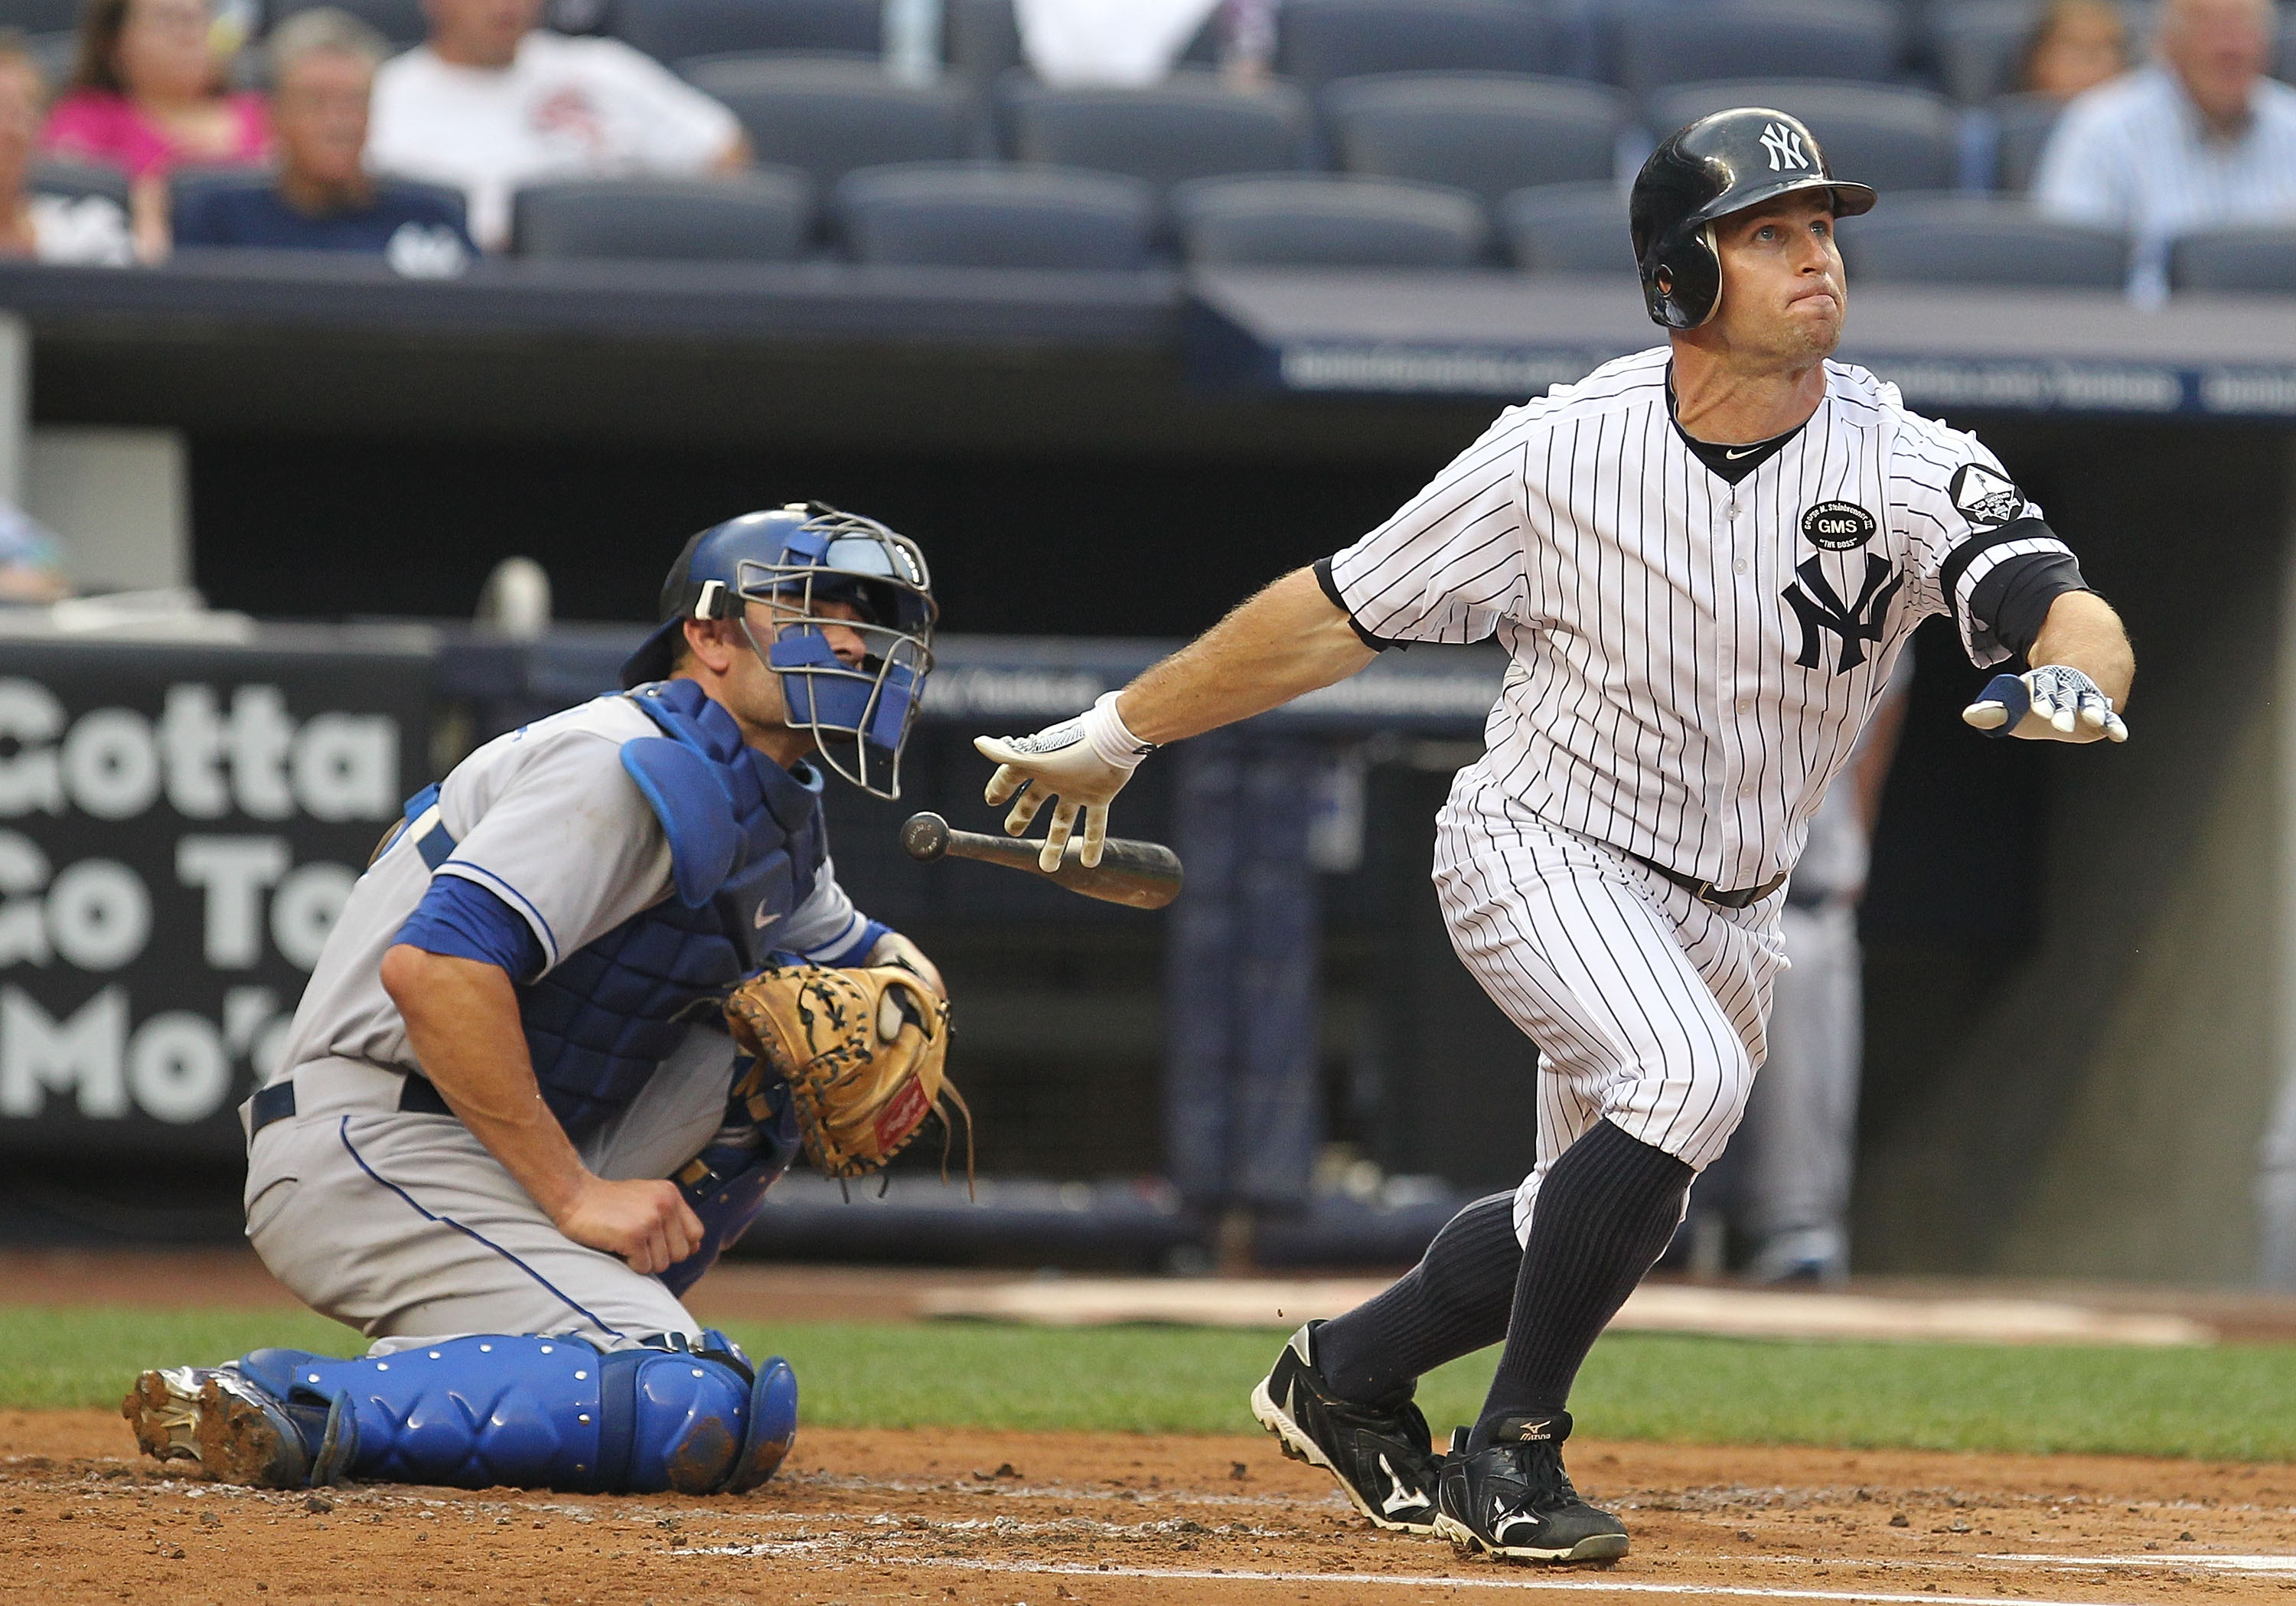 NEW YORK - JULY 23:  Brett Gardner #11 of The New York Yankees in action against The Kansas City Royals during their game on July 23, 2010 at Yankee Stadium in the Bronx Borough of New York City.  (Photo by Al Bello/Getty Images)